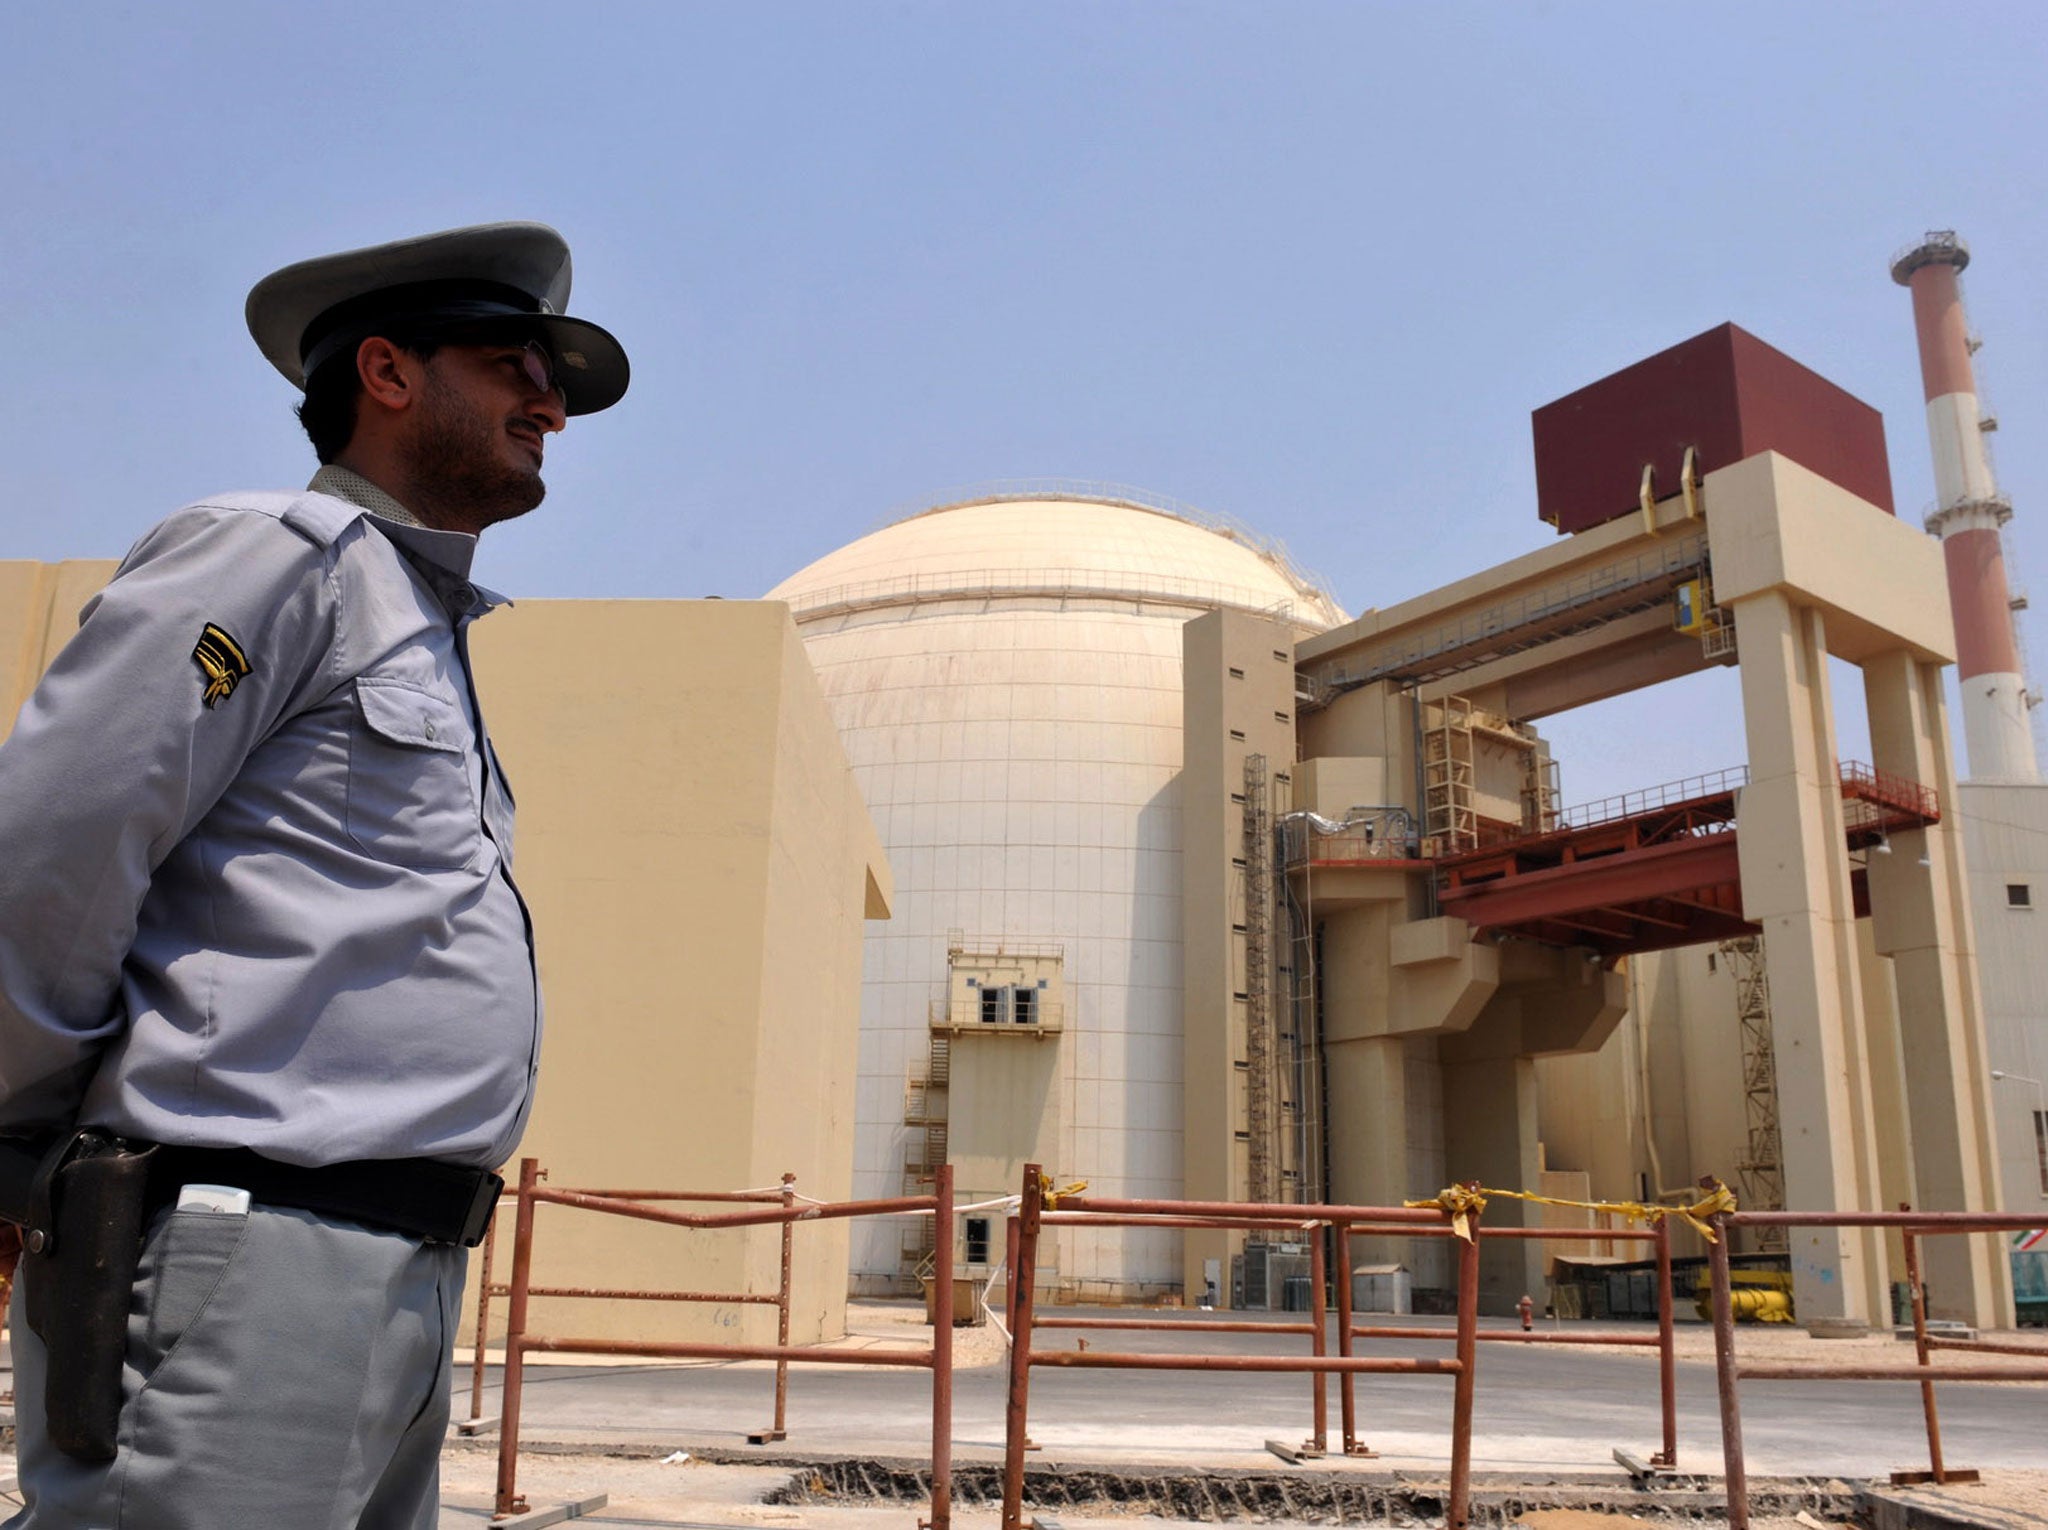 This handout image supplied by the IIPA (Iran International Photo Agency) shows a view of the reactor building at the Russian-built Bushehr nuclear power plant as the first fuel is loaded, on August 21, 2010 in Bushehr, southern Iran.